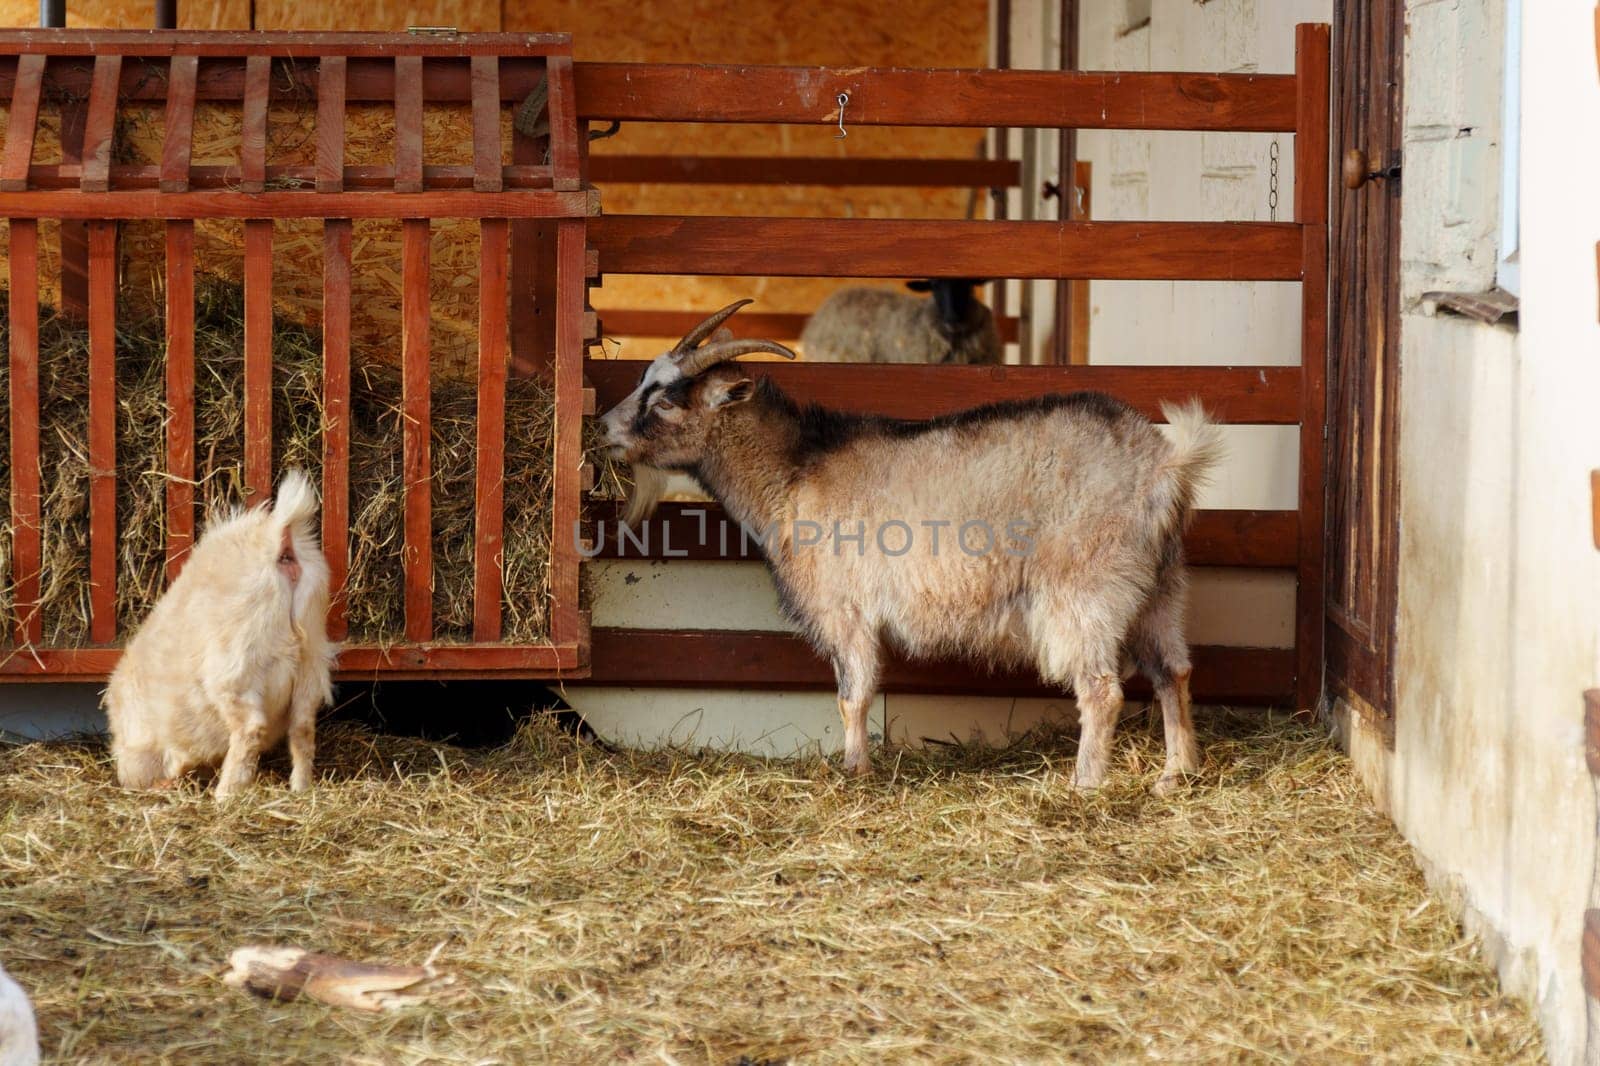 A group of serene white goats stand inside a pen, calmly grazing.